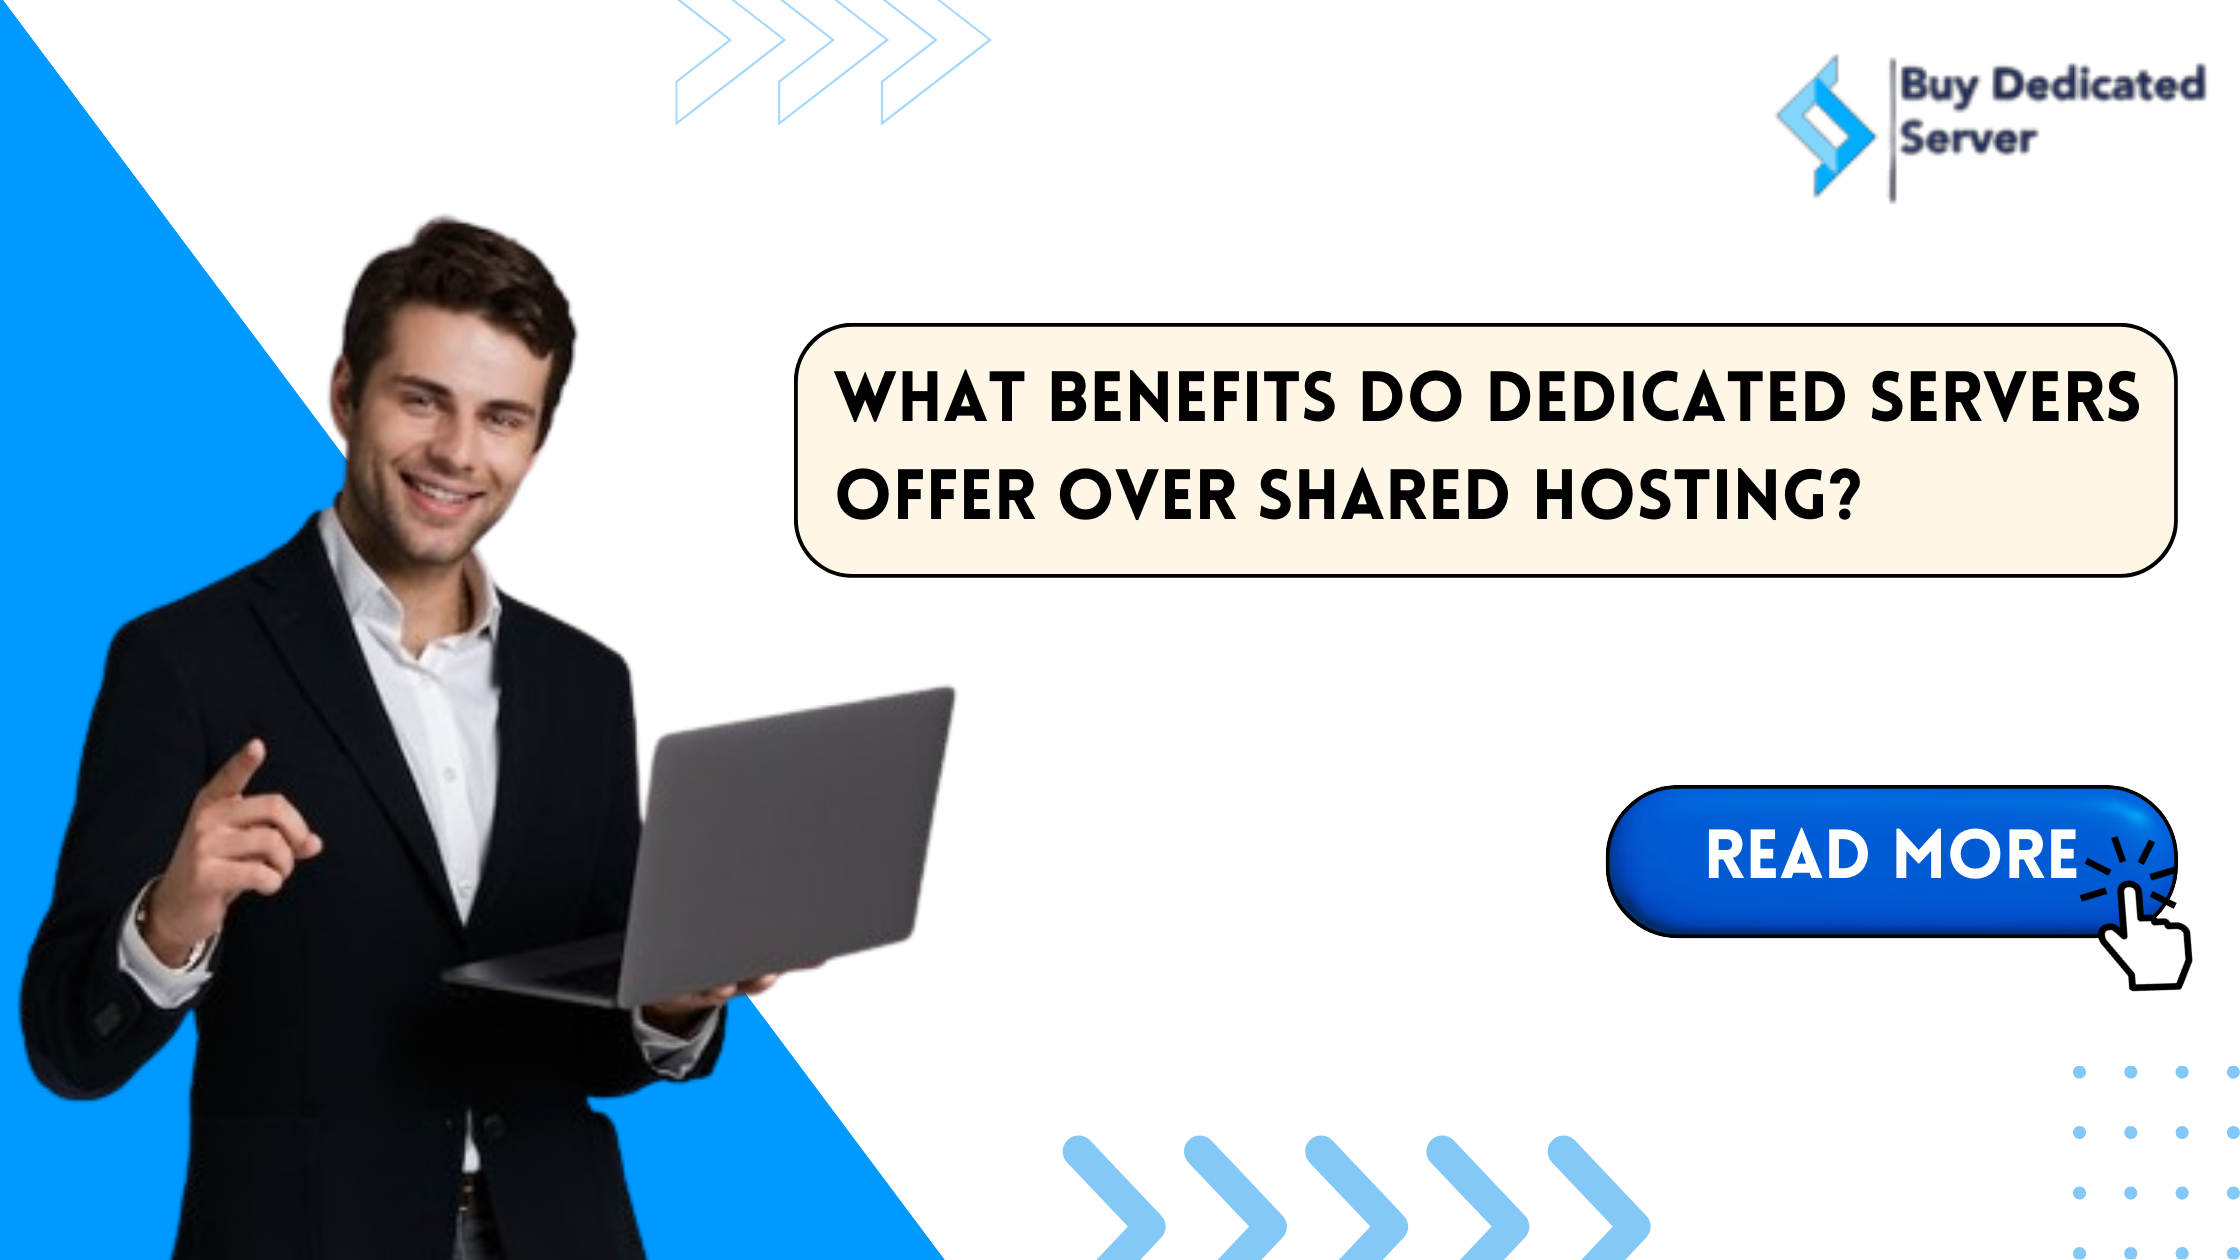 What Benefits Do Dedicated Servers Offer Over Shared Hosting